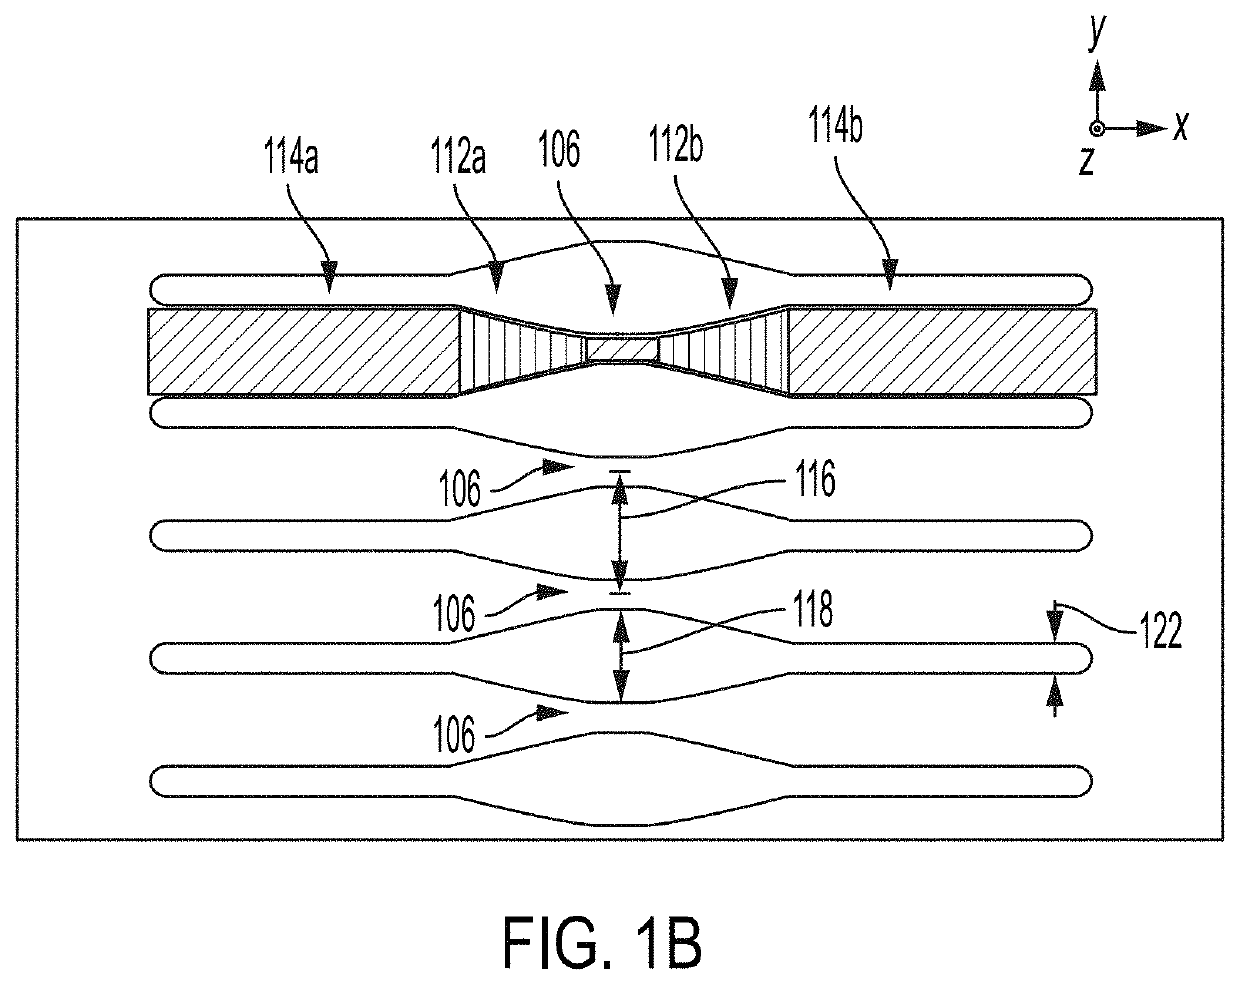 High-throughput microfluidic chip having parallelized constrictions for perturbing cell membranes